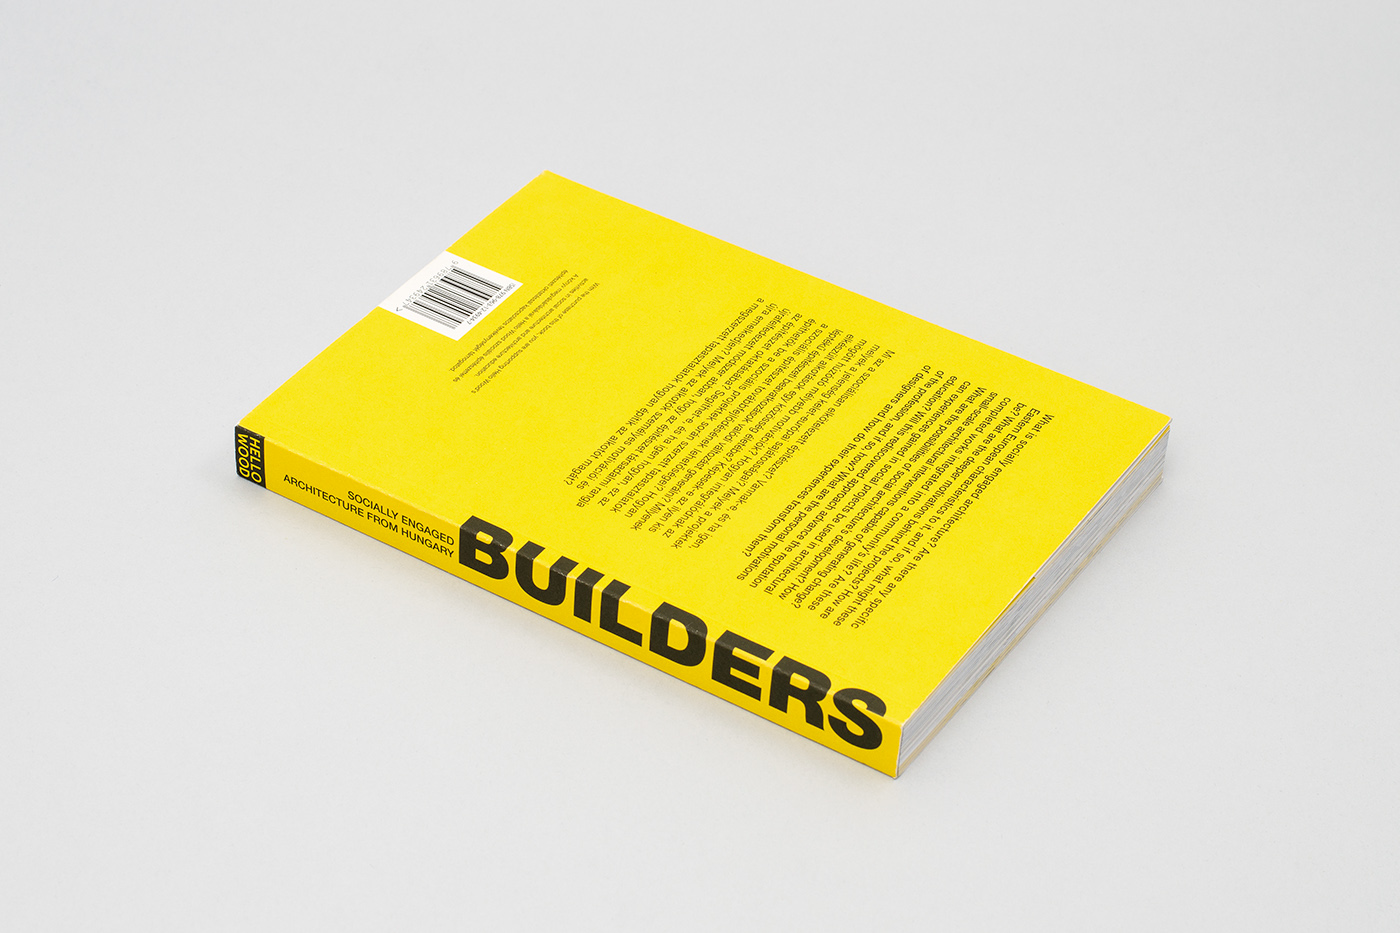 social architecture book build wood builders hungary